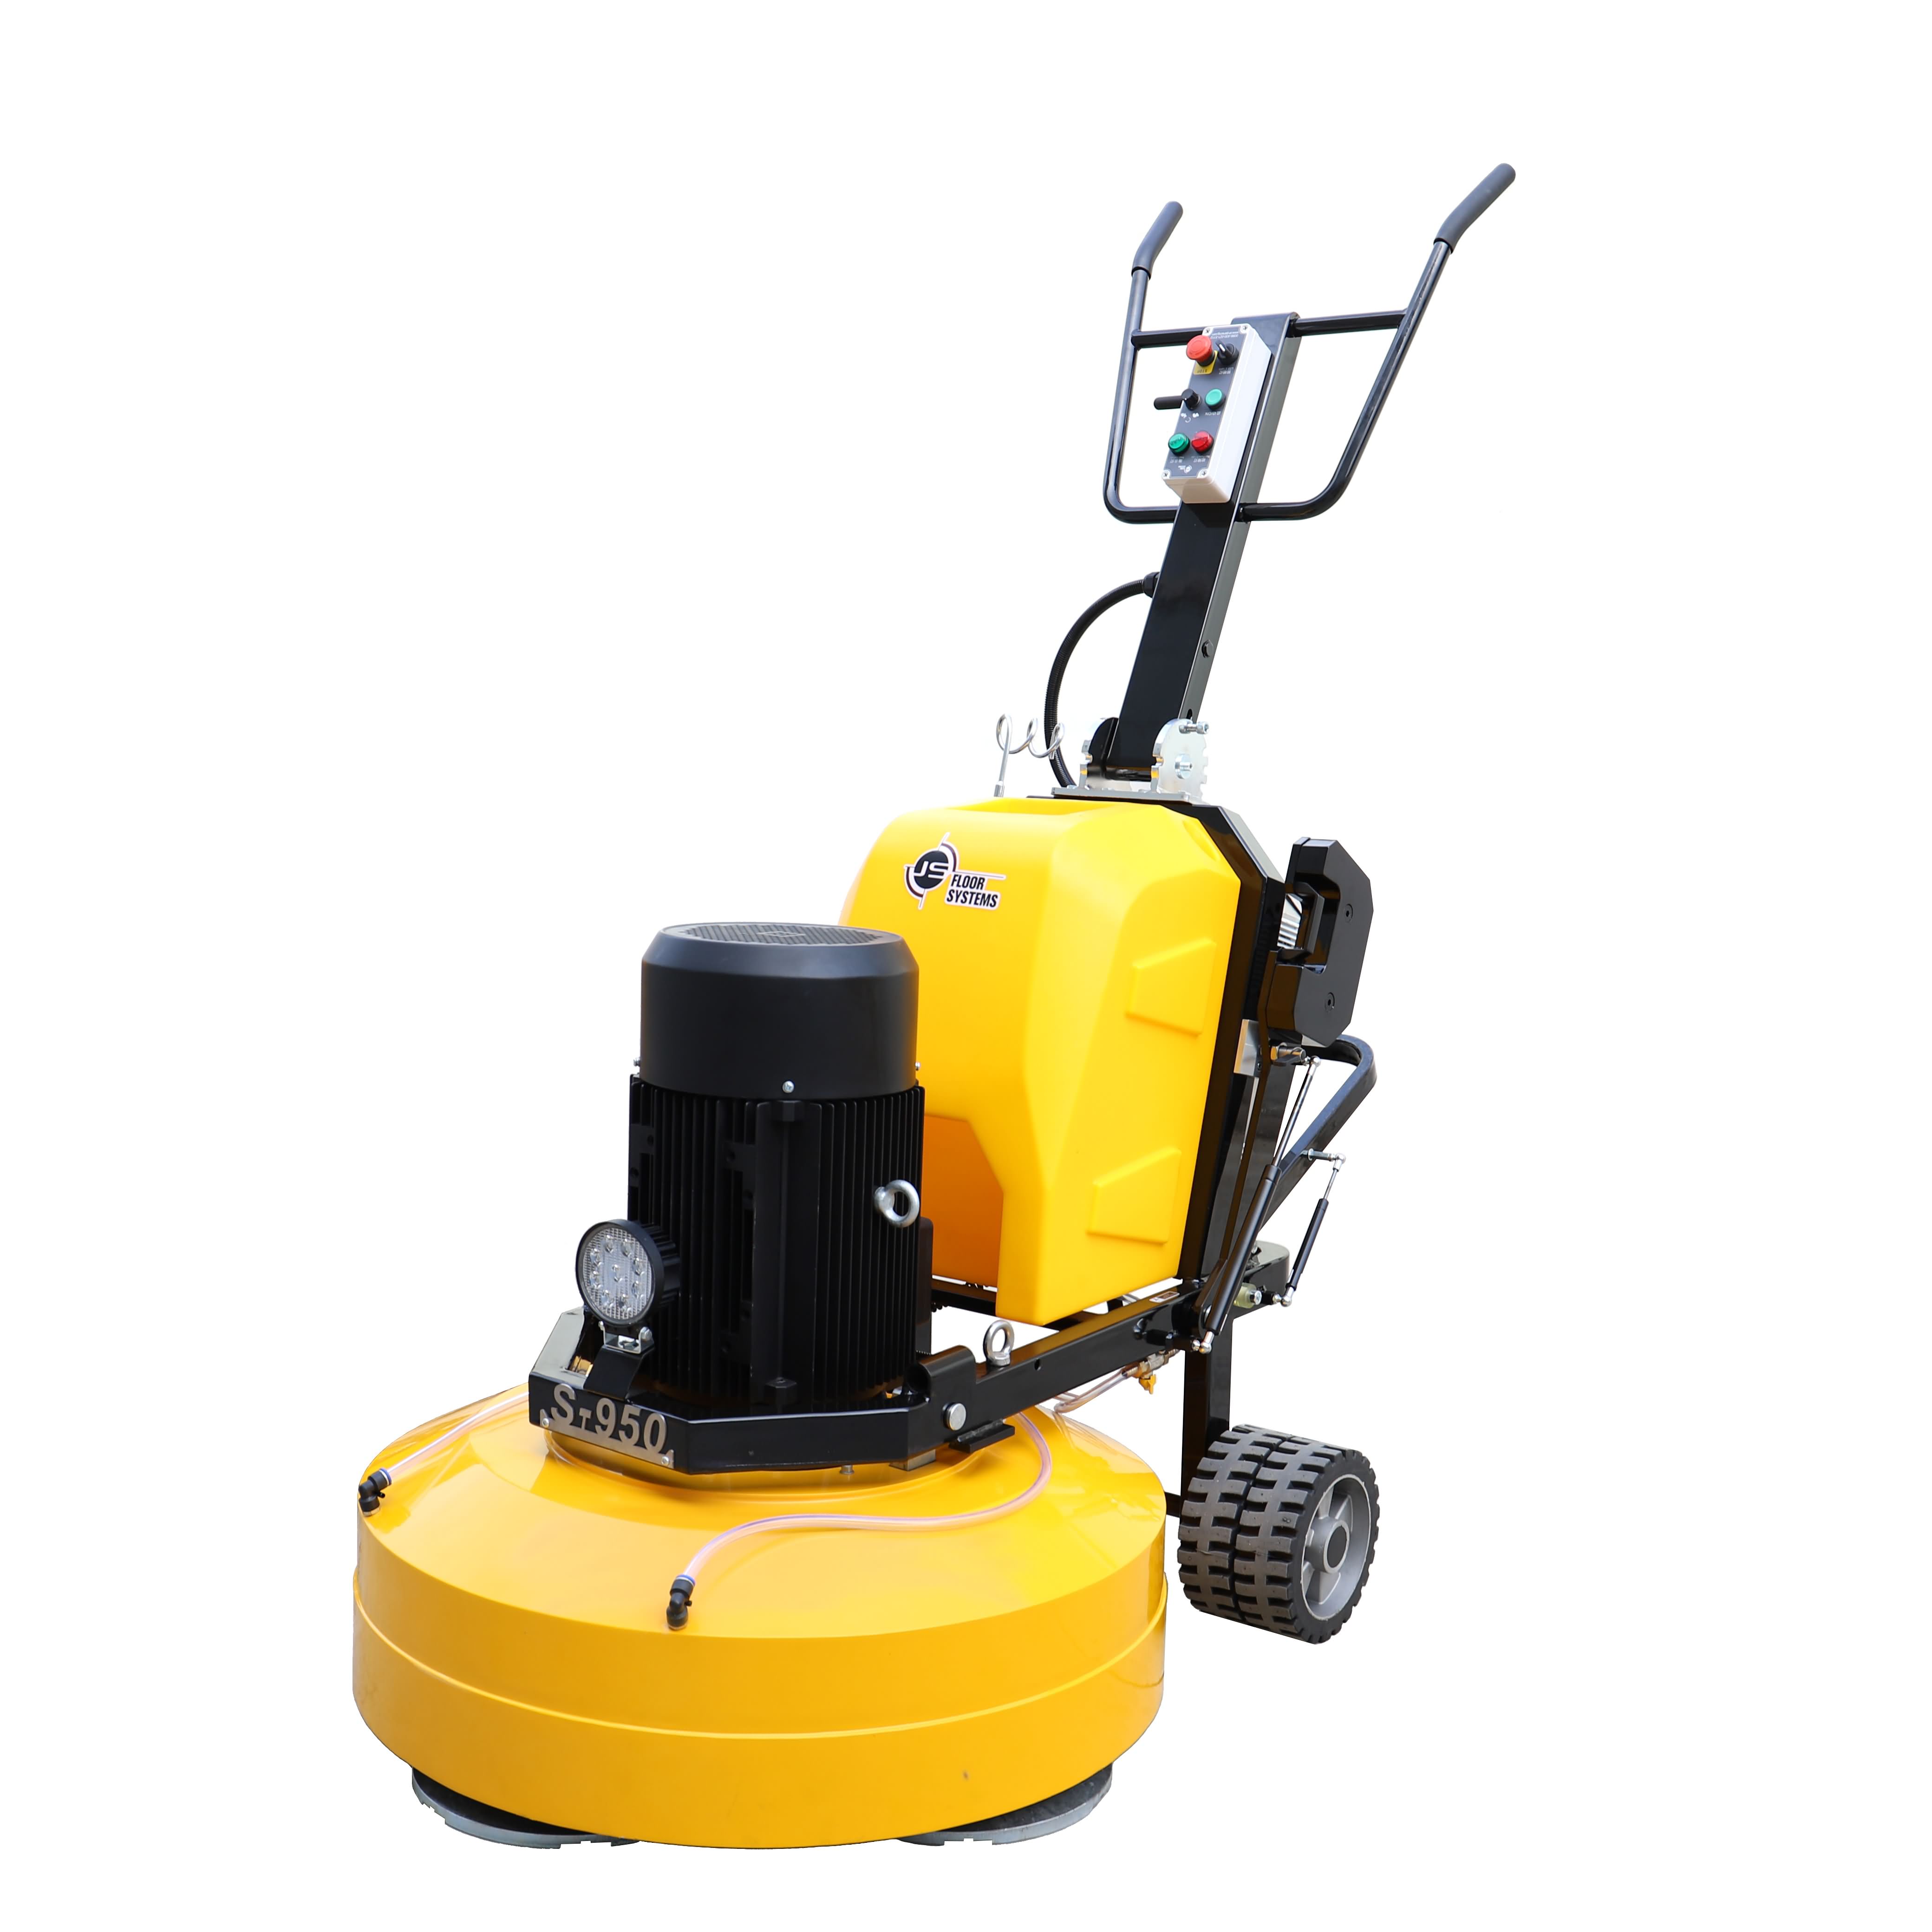 4 Heads concrete floor grinder and polisher